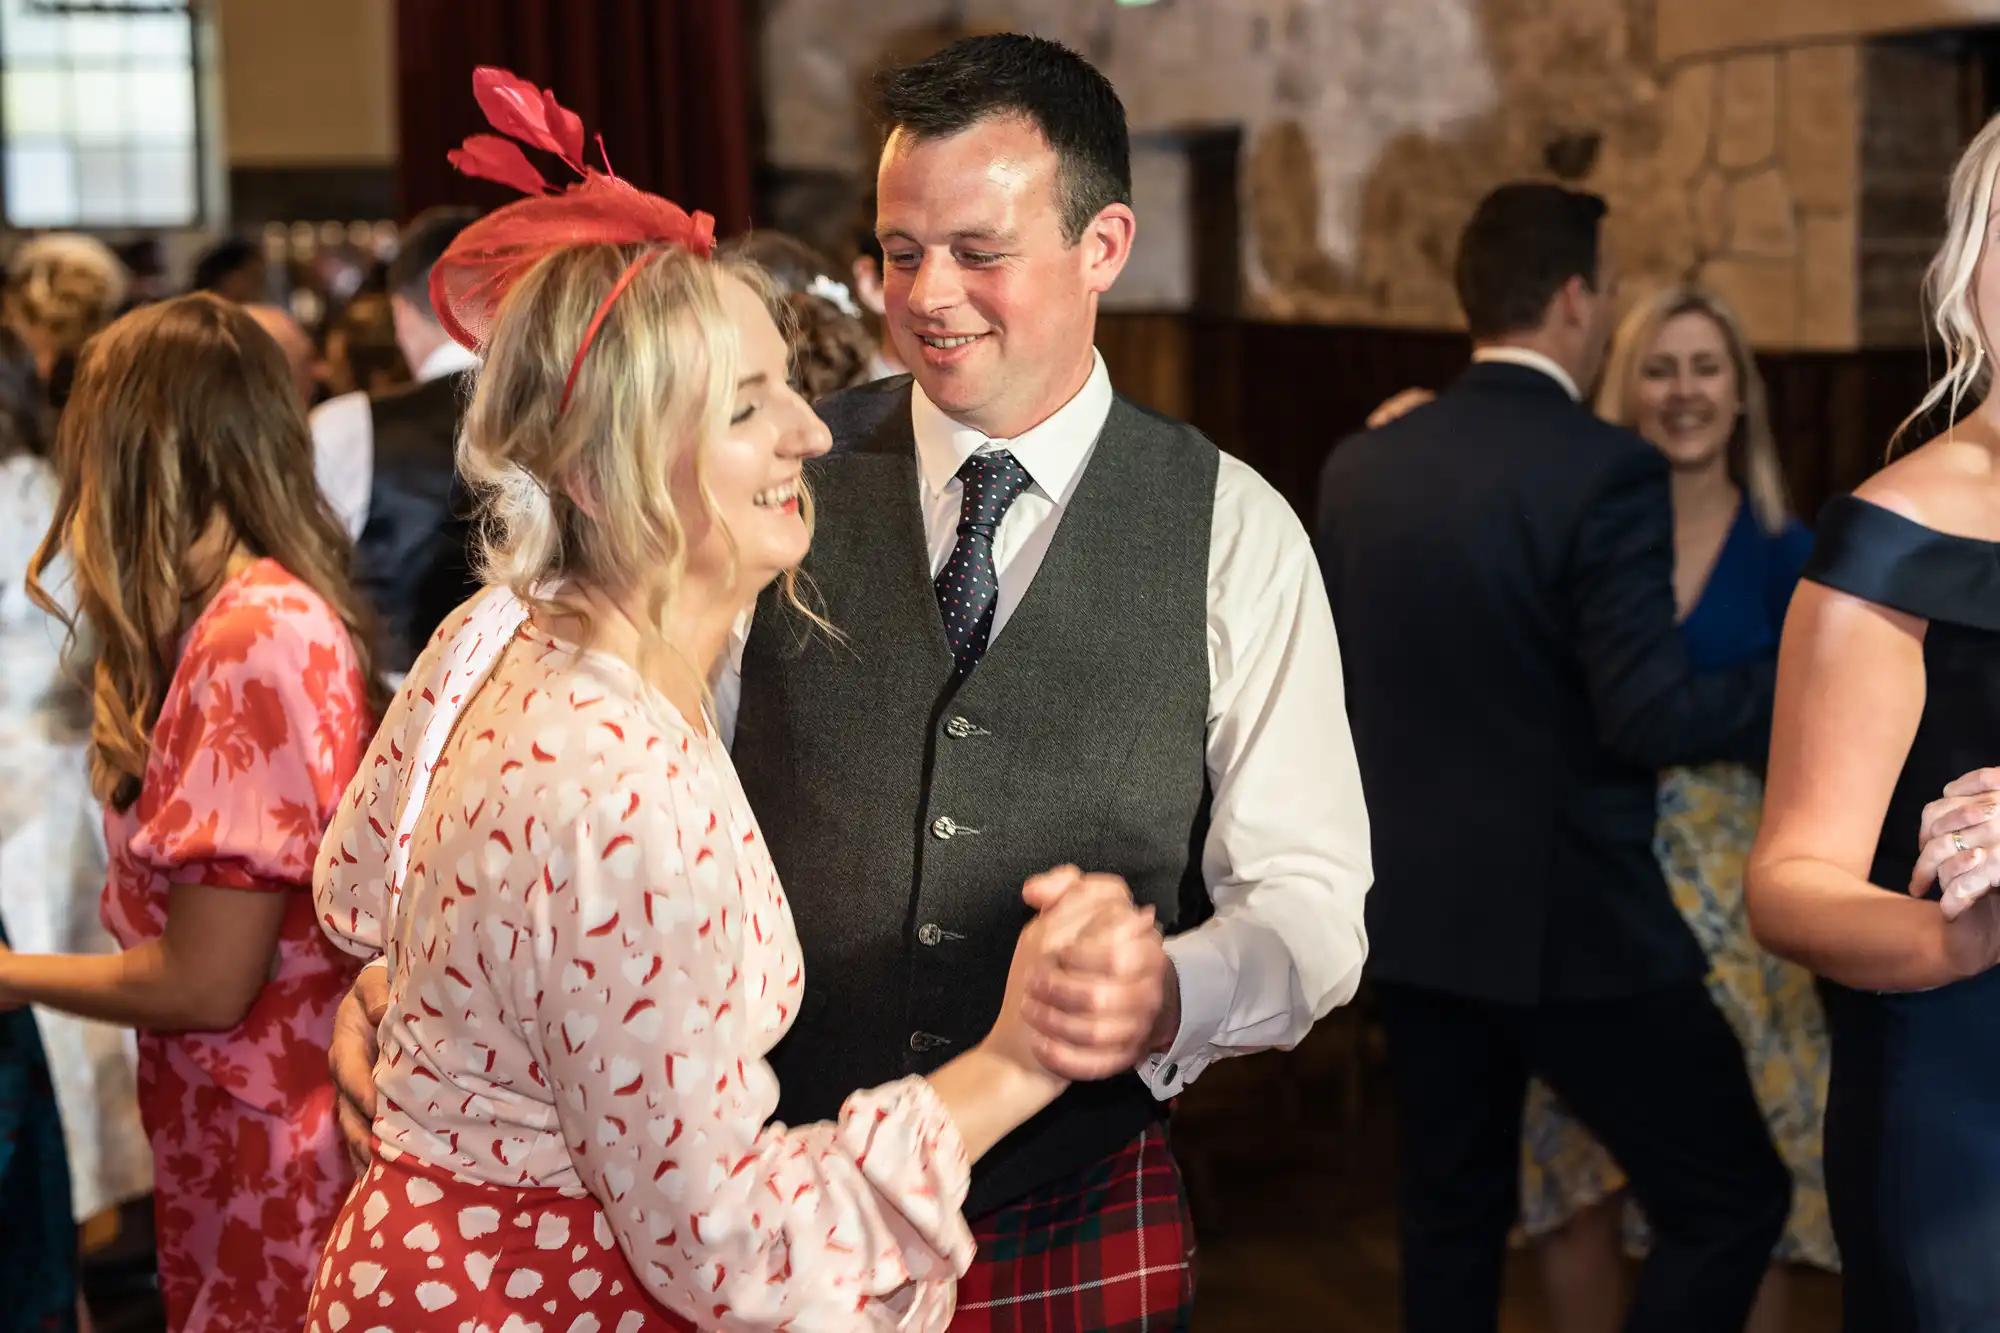 A man in a kilt and waistcoat dances with a smiling woman in a red and white dress at a lively indoor event.